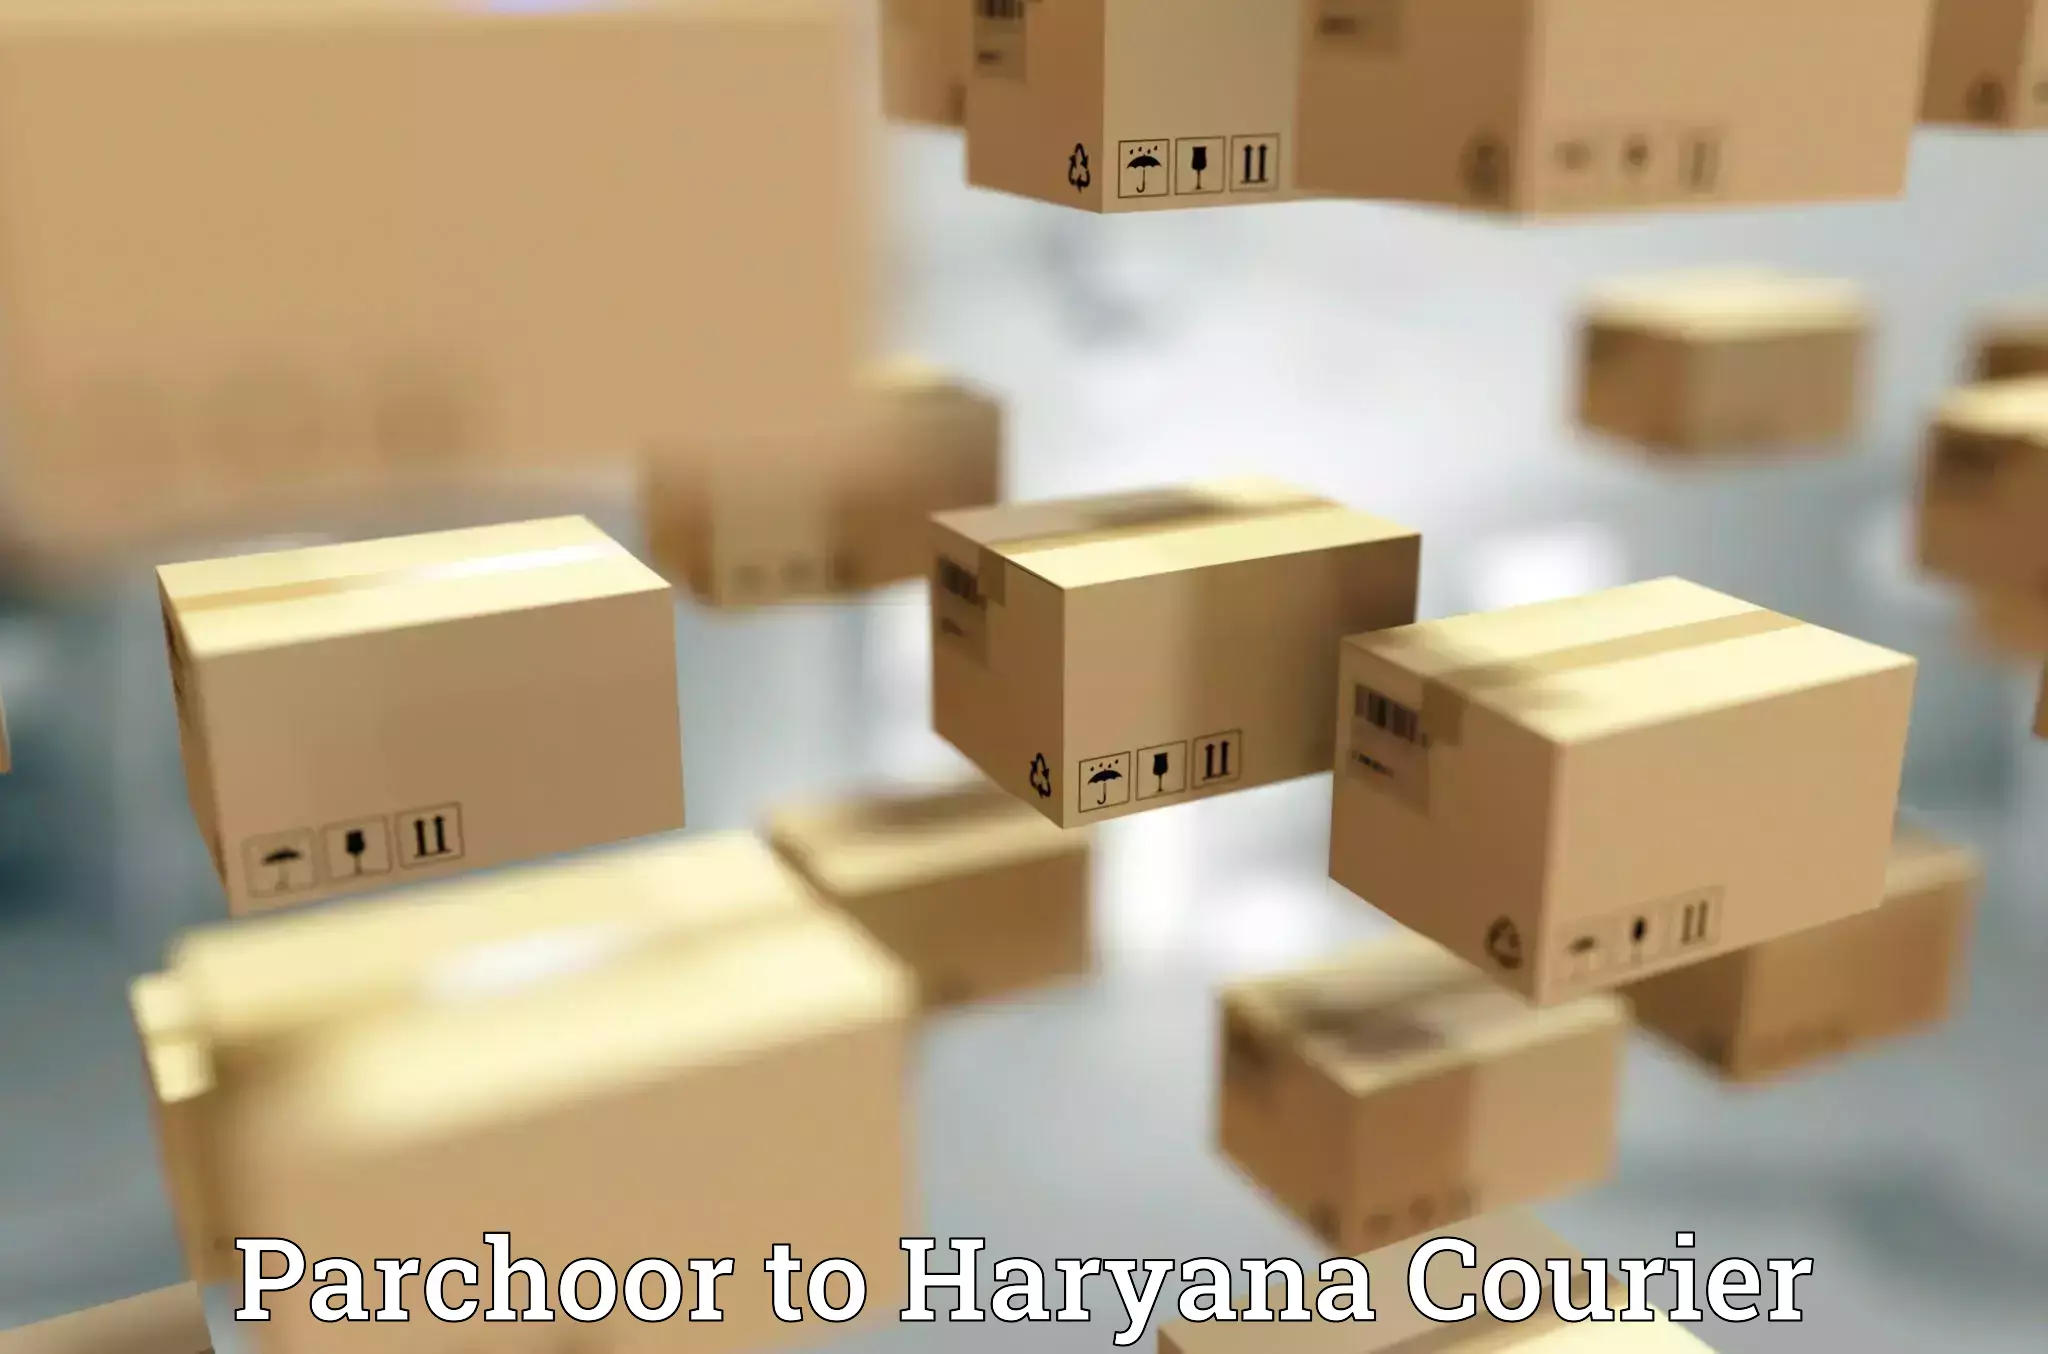 Multi-city courier Parchoor to Chirya